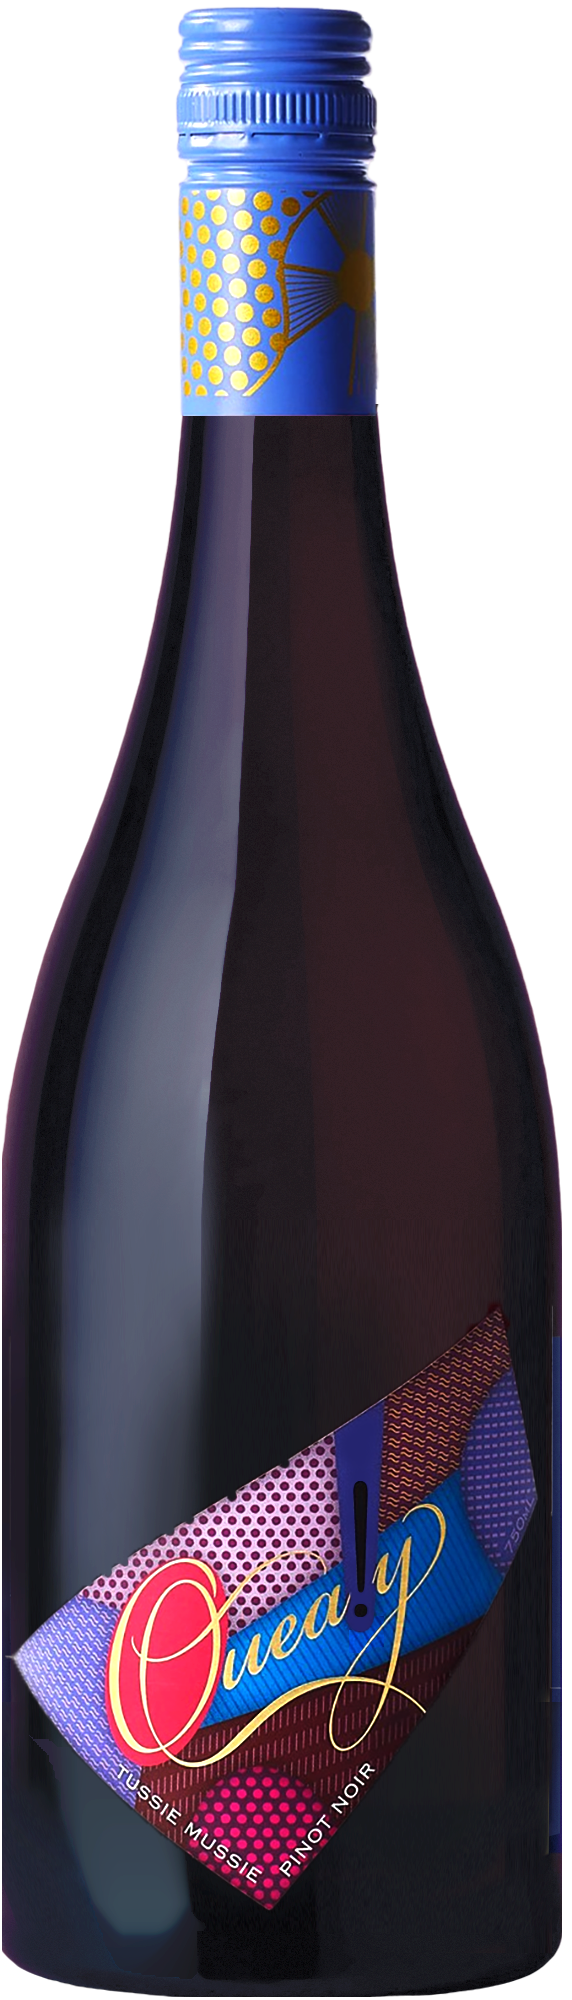 Quealy Tussie Mussie Pinot Noir 2023